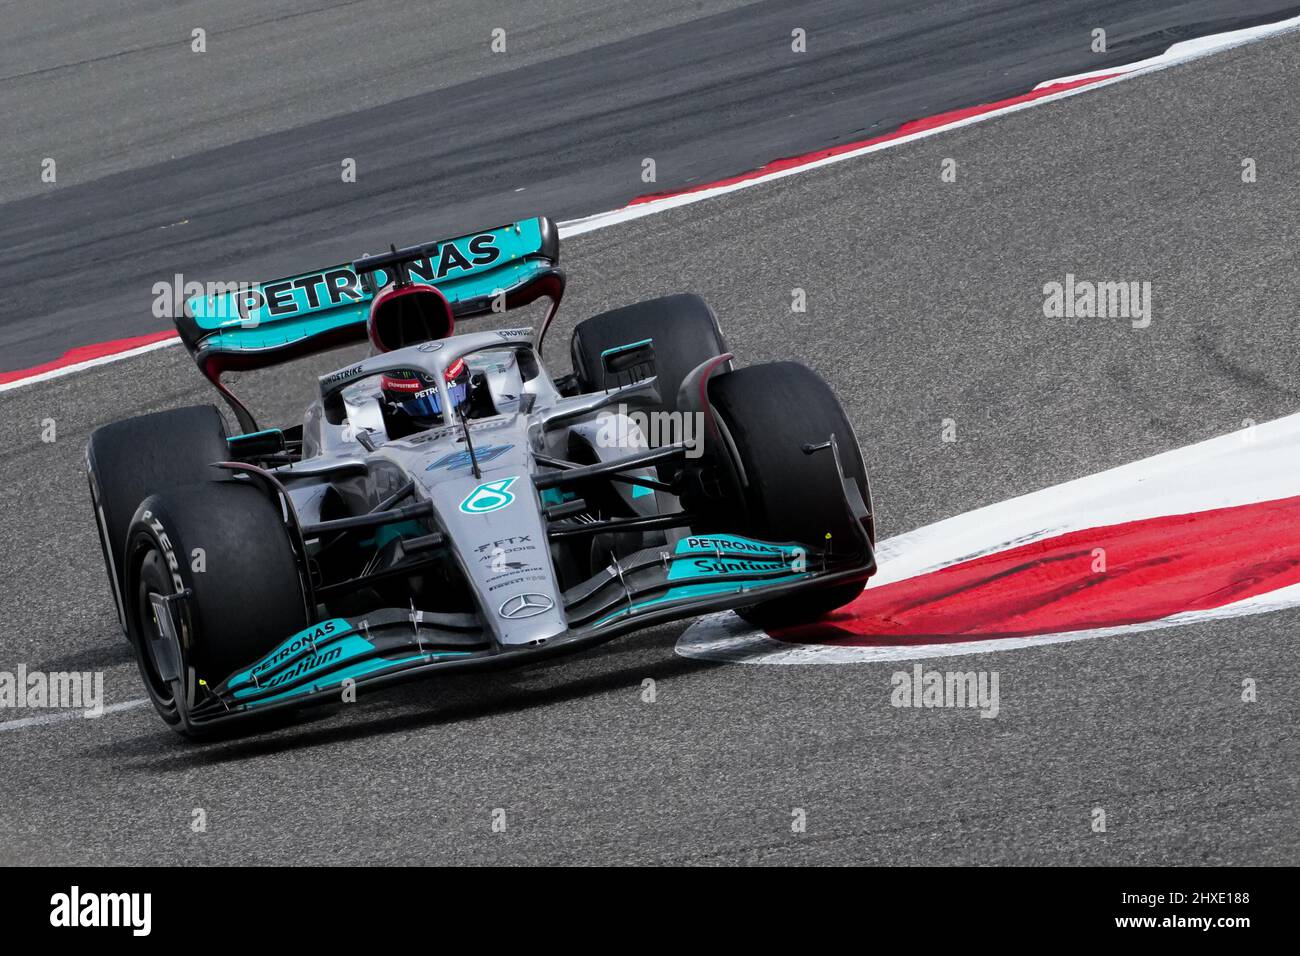 Bahrain International Circuit, Sakhir, Bahrain on 11 March 2022  George Russell 63 (GBR), Mercedes W13 during Day 2 FORMULA 1 ARAMCO PRE-SEASON TESTING 2022 Eleanor Hoad Credit: Every Second Media/Alamy Live News Stock Photo